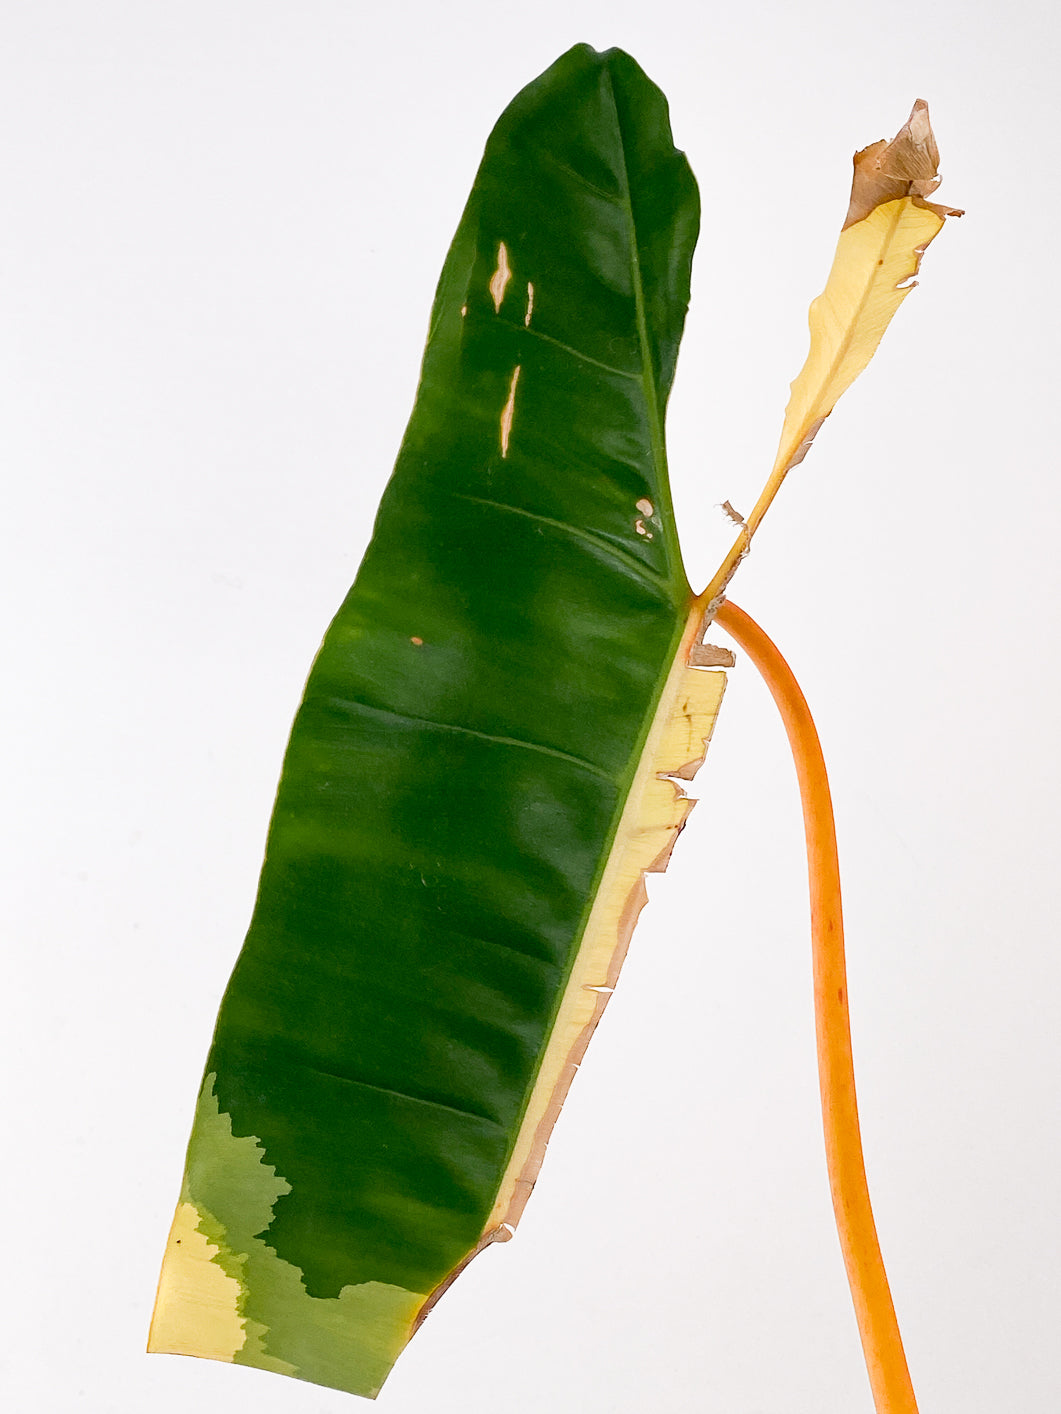 Philodendron  Billietiae variegated  Top Cutting 2 leaves 1 sprout 2 extra nodes Slightly Rooted